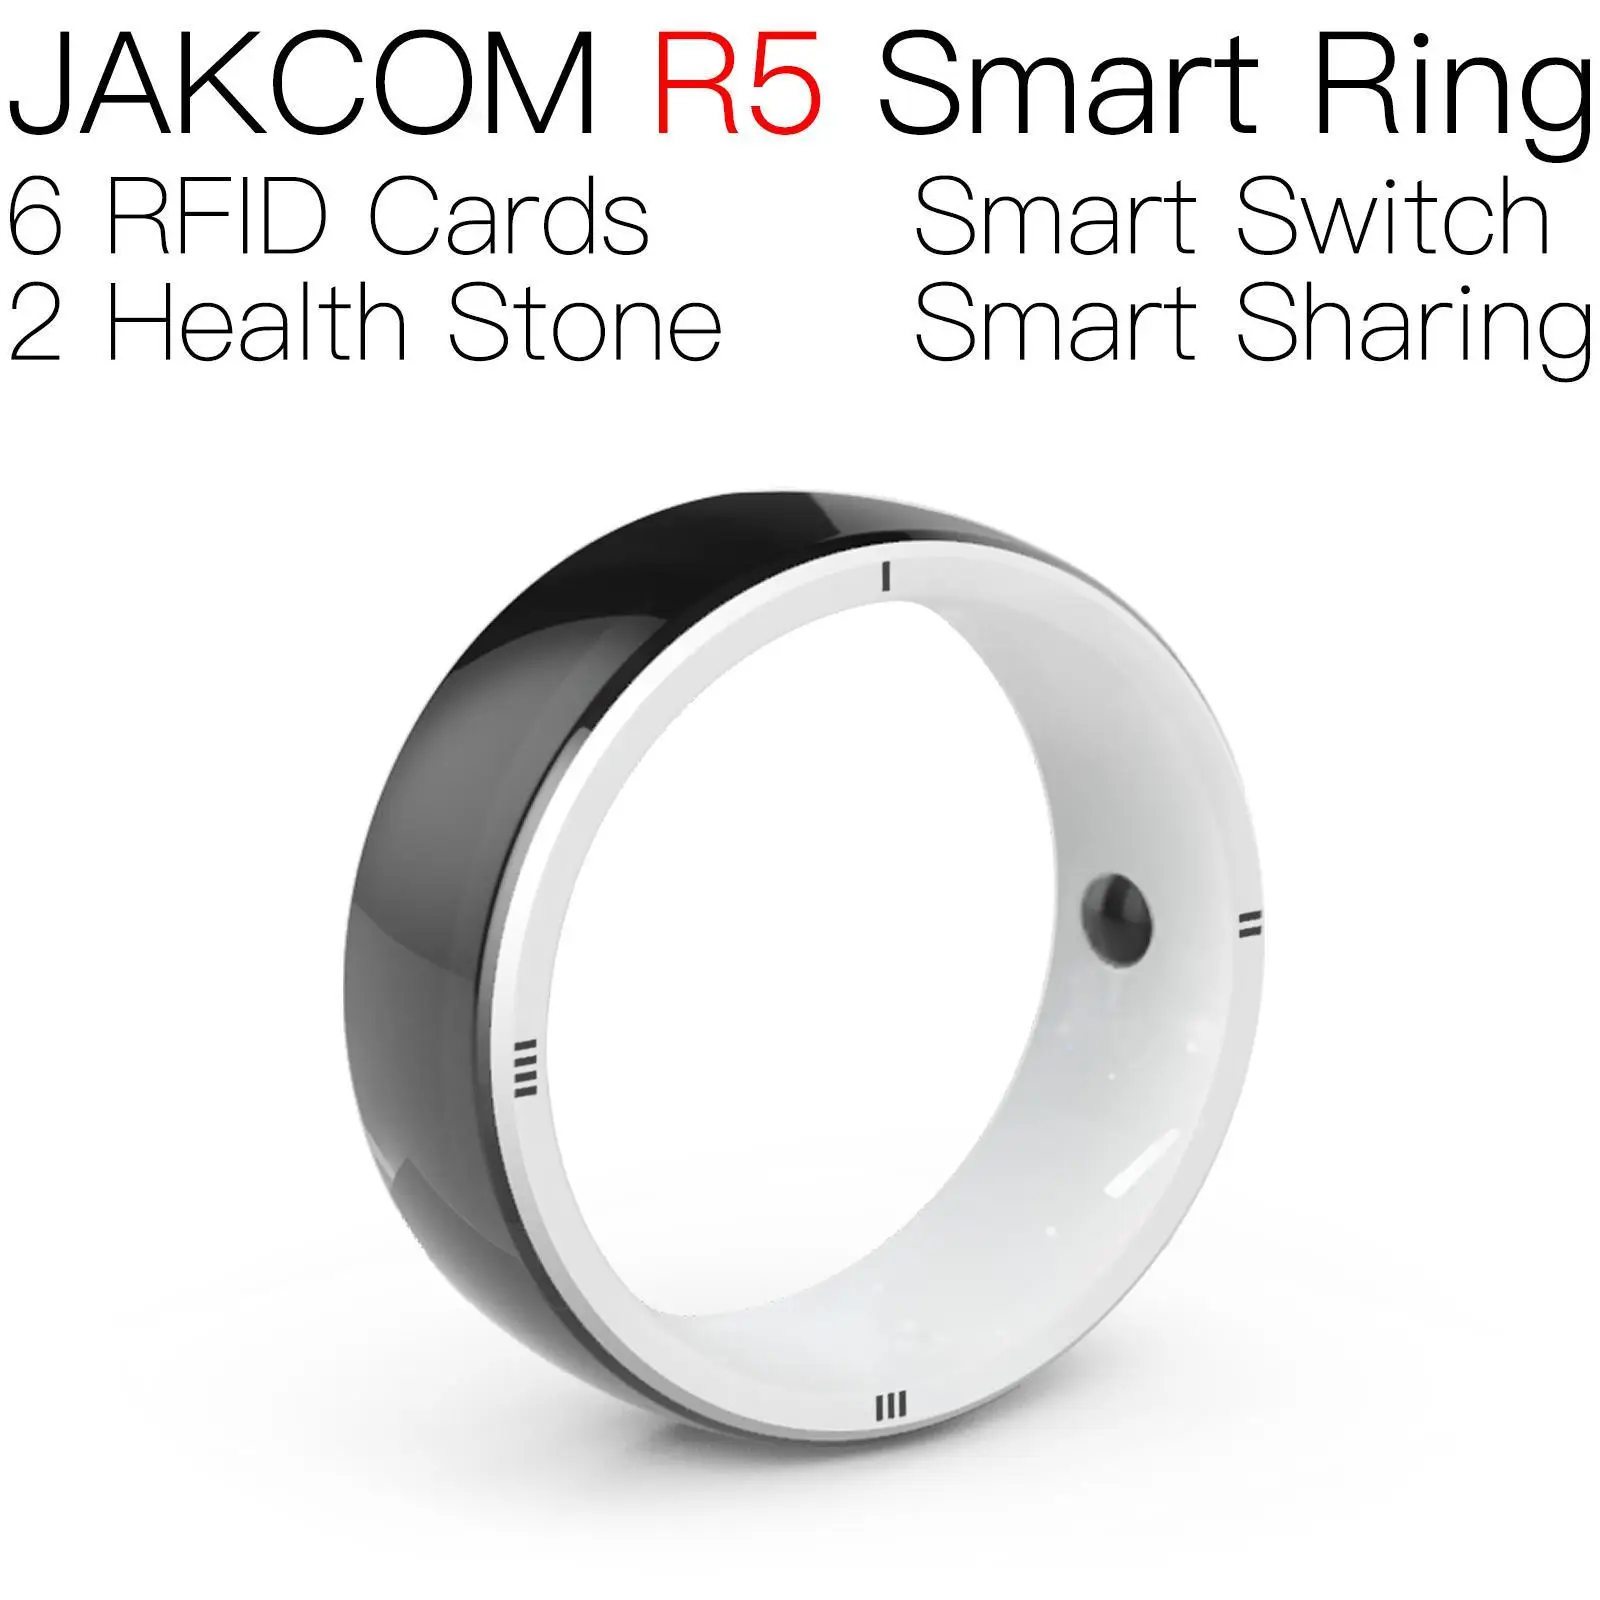 

JAKCOM R5 Smart Ring better than breath of wild nfc capsule tag 125khz t5577 all sale products dog microchip iso rfid